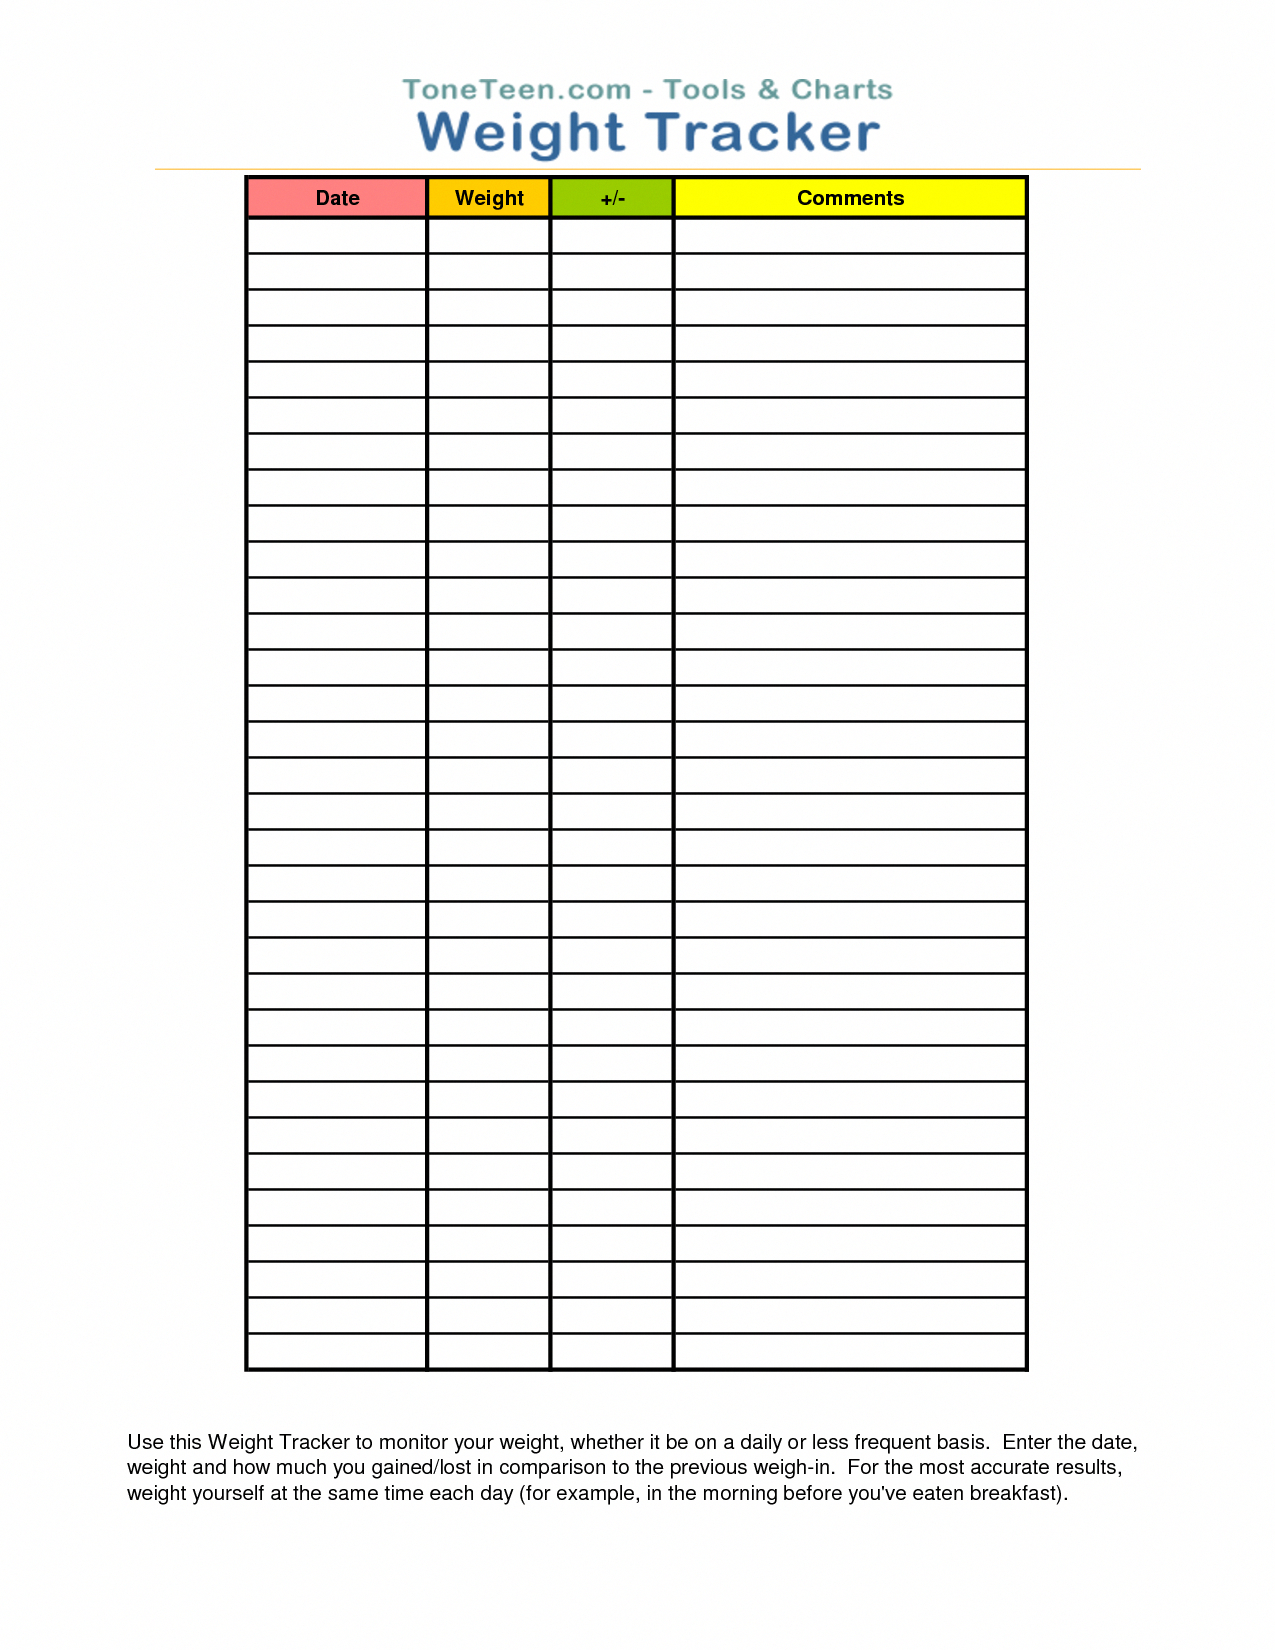 Free Printable Weight Tracker Chart #healthfitness | Health Fitness - Free Printable Weight Loss Tracker Chart